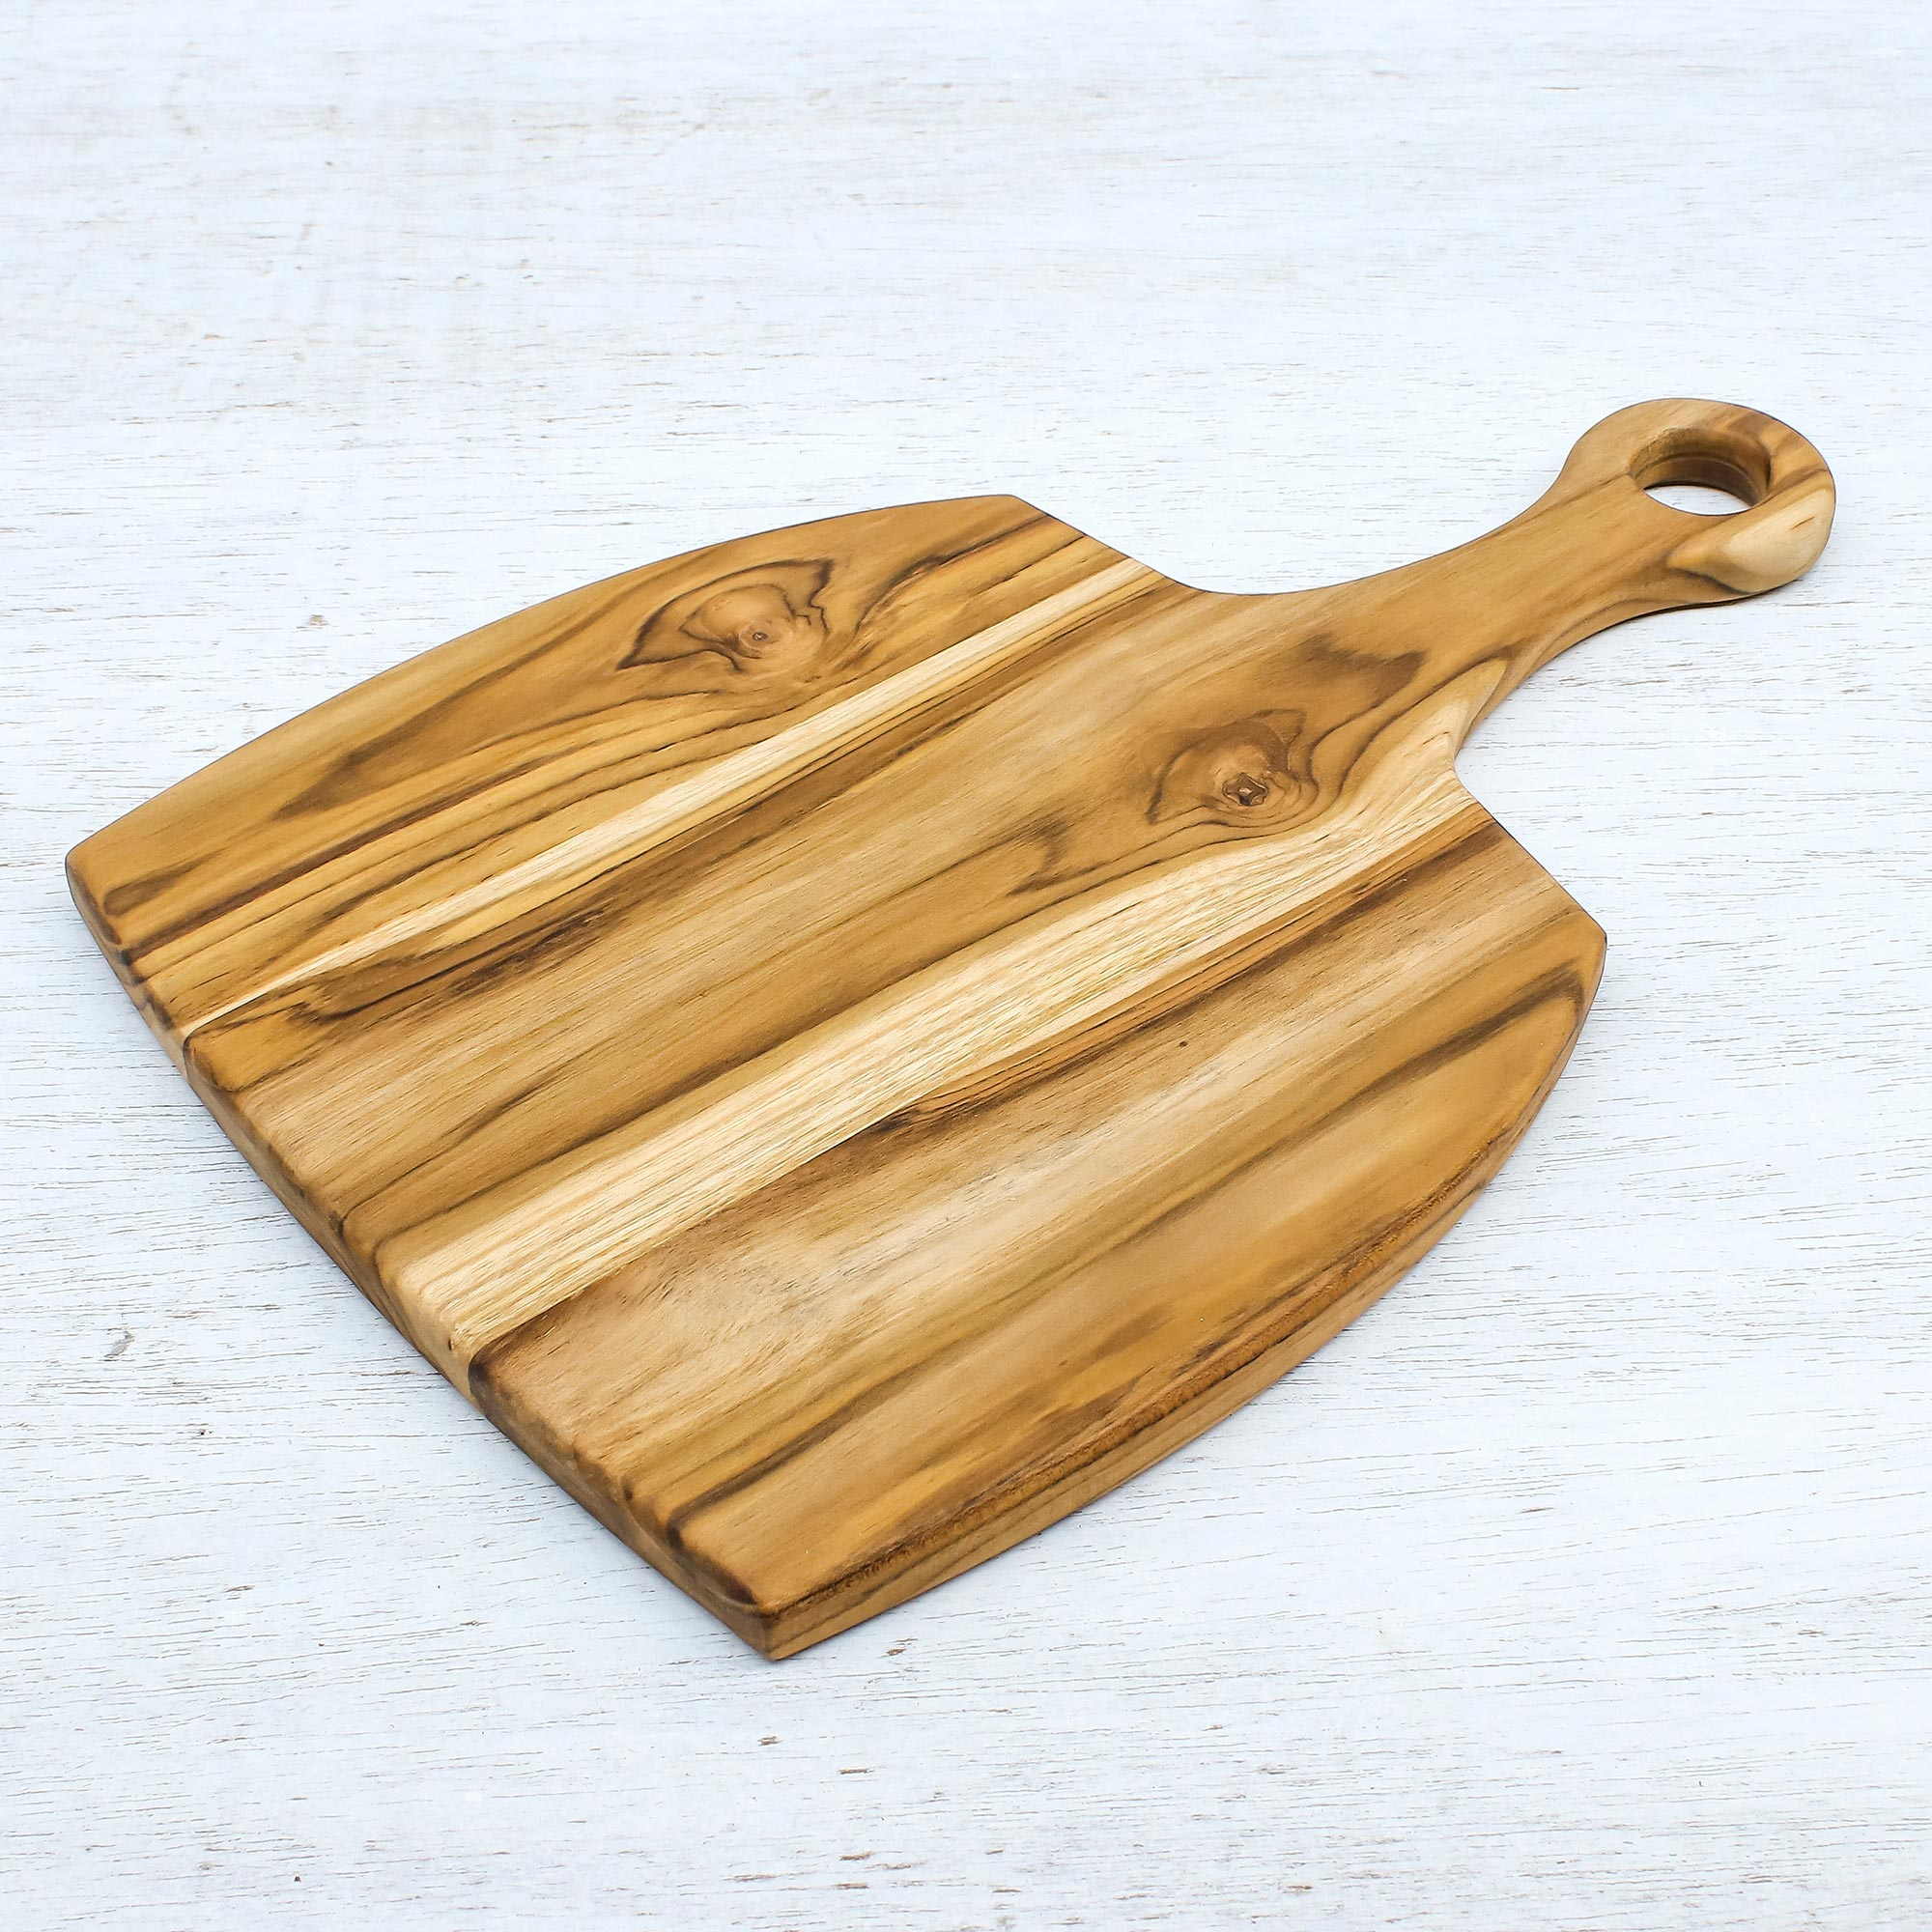 BEEFURNI Teak Wood Cutting Board with Hand Grip, Small Wooden Cutting  Boards for Kitchen, Small Chopping Board Wood, Kitchen Gifts, 1-Year